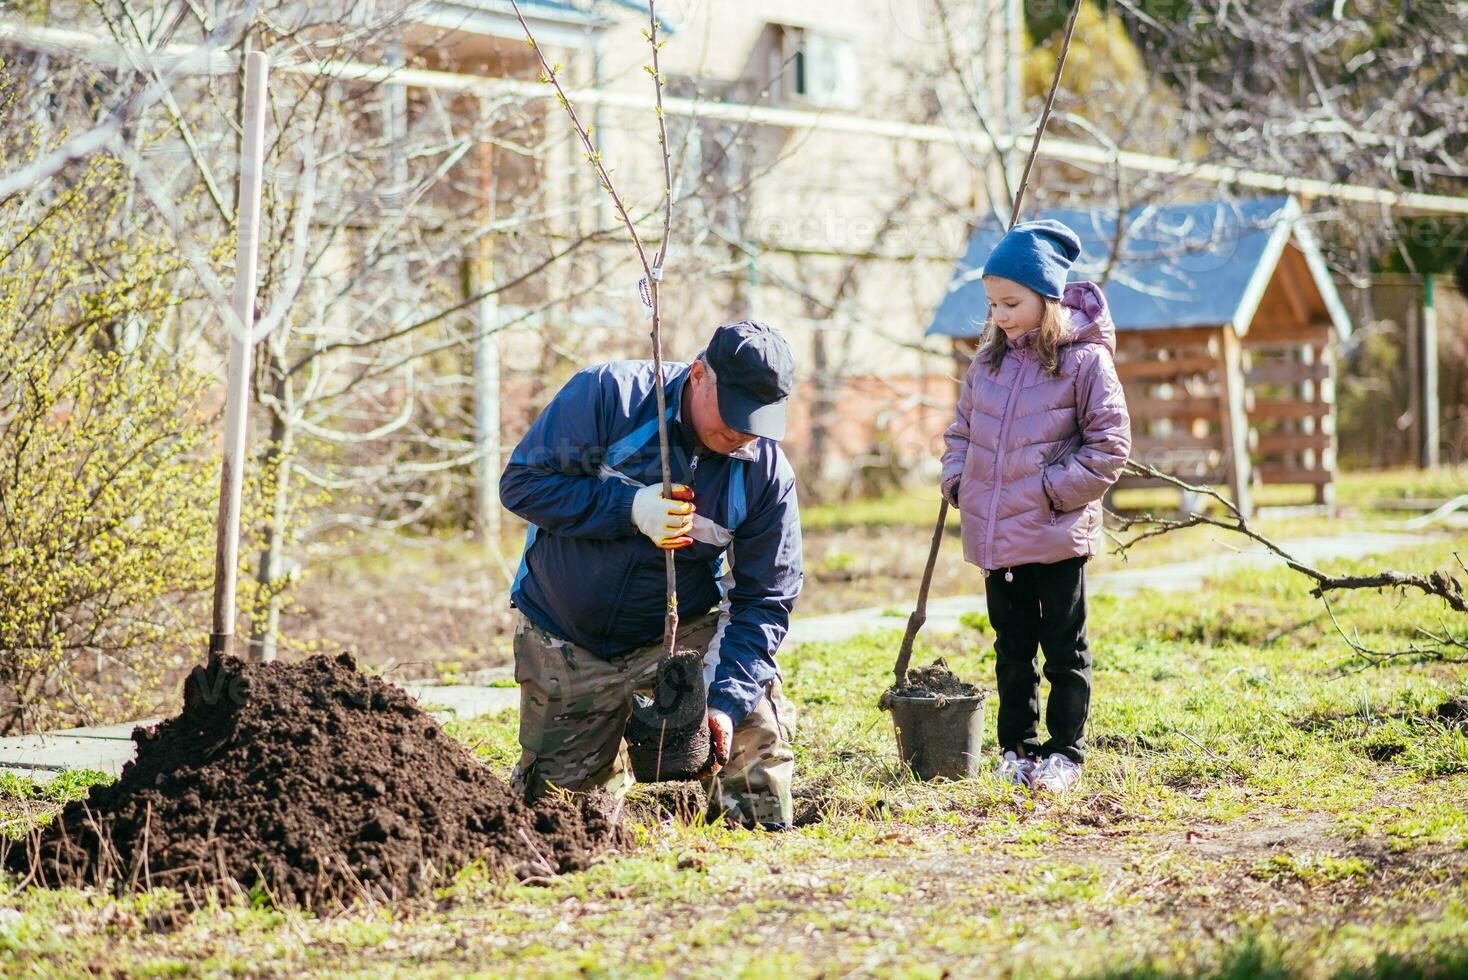 A father and his daughter are planting a fruit tree photo